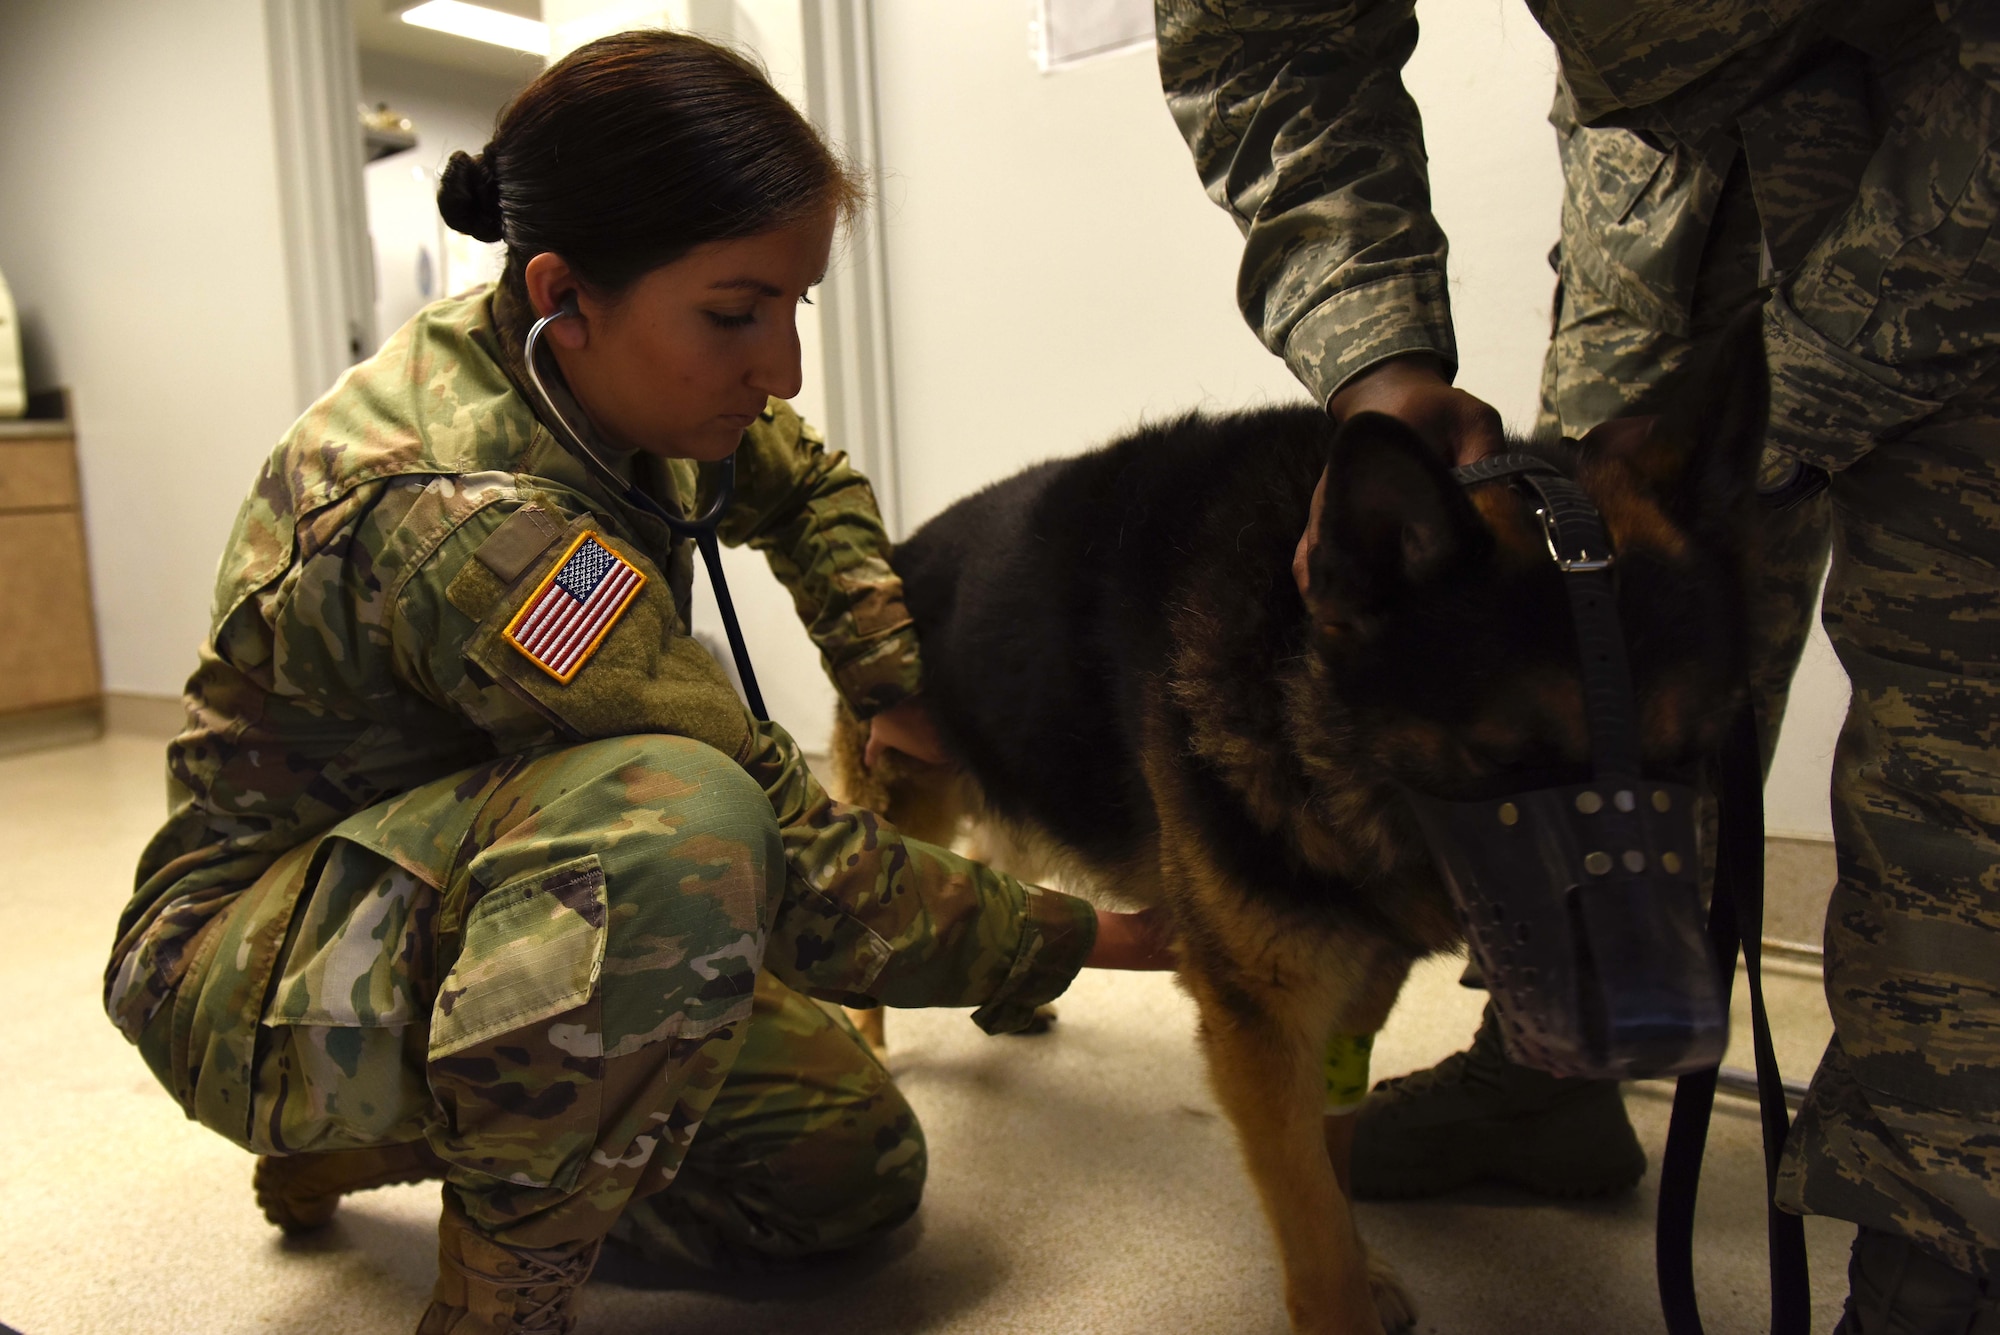 U.S. Army Capt. Sarah Merriday, Public Health Activity Veterinary Corps officer, monitors Military Working Dog Jeck’s heart rate during a check-up April 17, 2017, at the Little Rock Air Force Base Veterinary Treatment Facility on Little Rock AFB, Ark. The clinic personnel train K9 handlers on how to care for their partners, such as proper ear cleaning, stopping bleeding and how to treat other traumas. (U.S. Air Force photo by Senior Airman Mercedes Taylor)